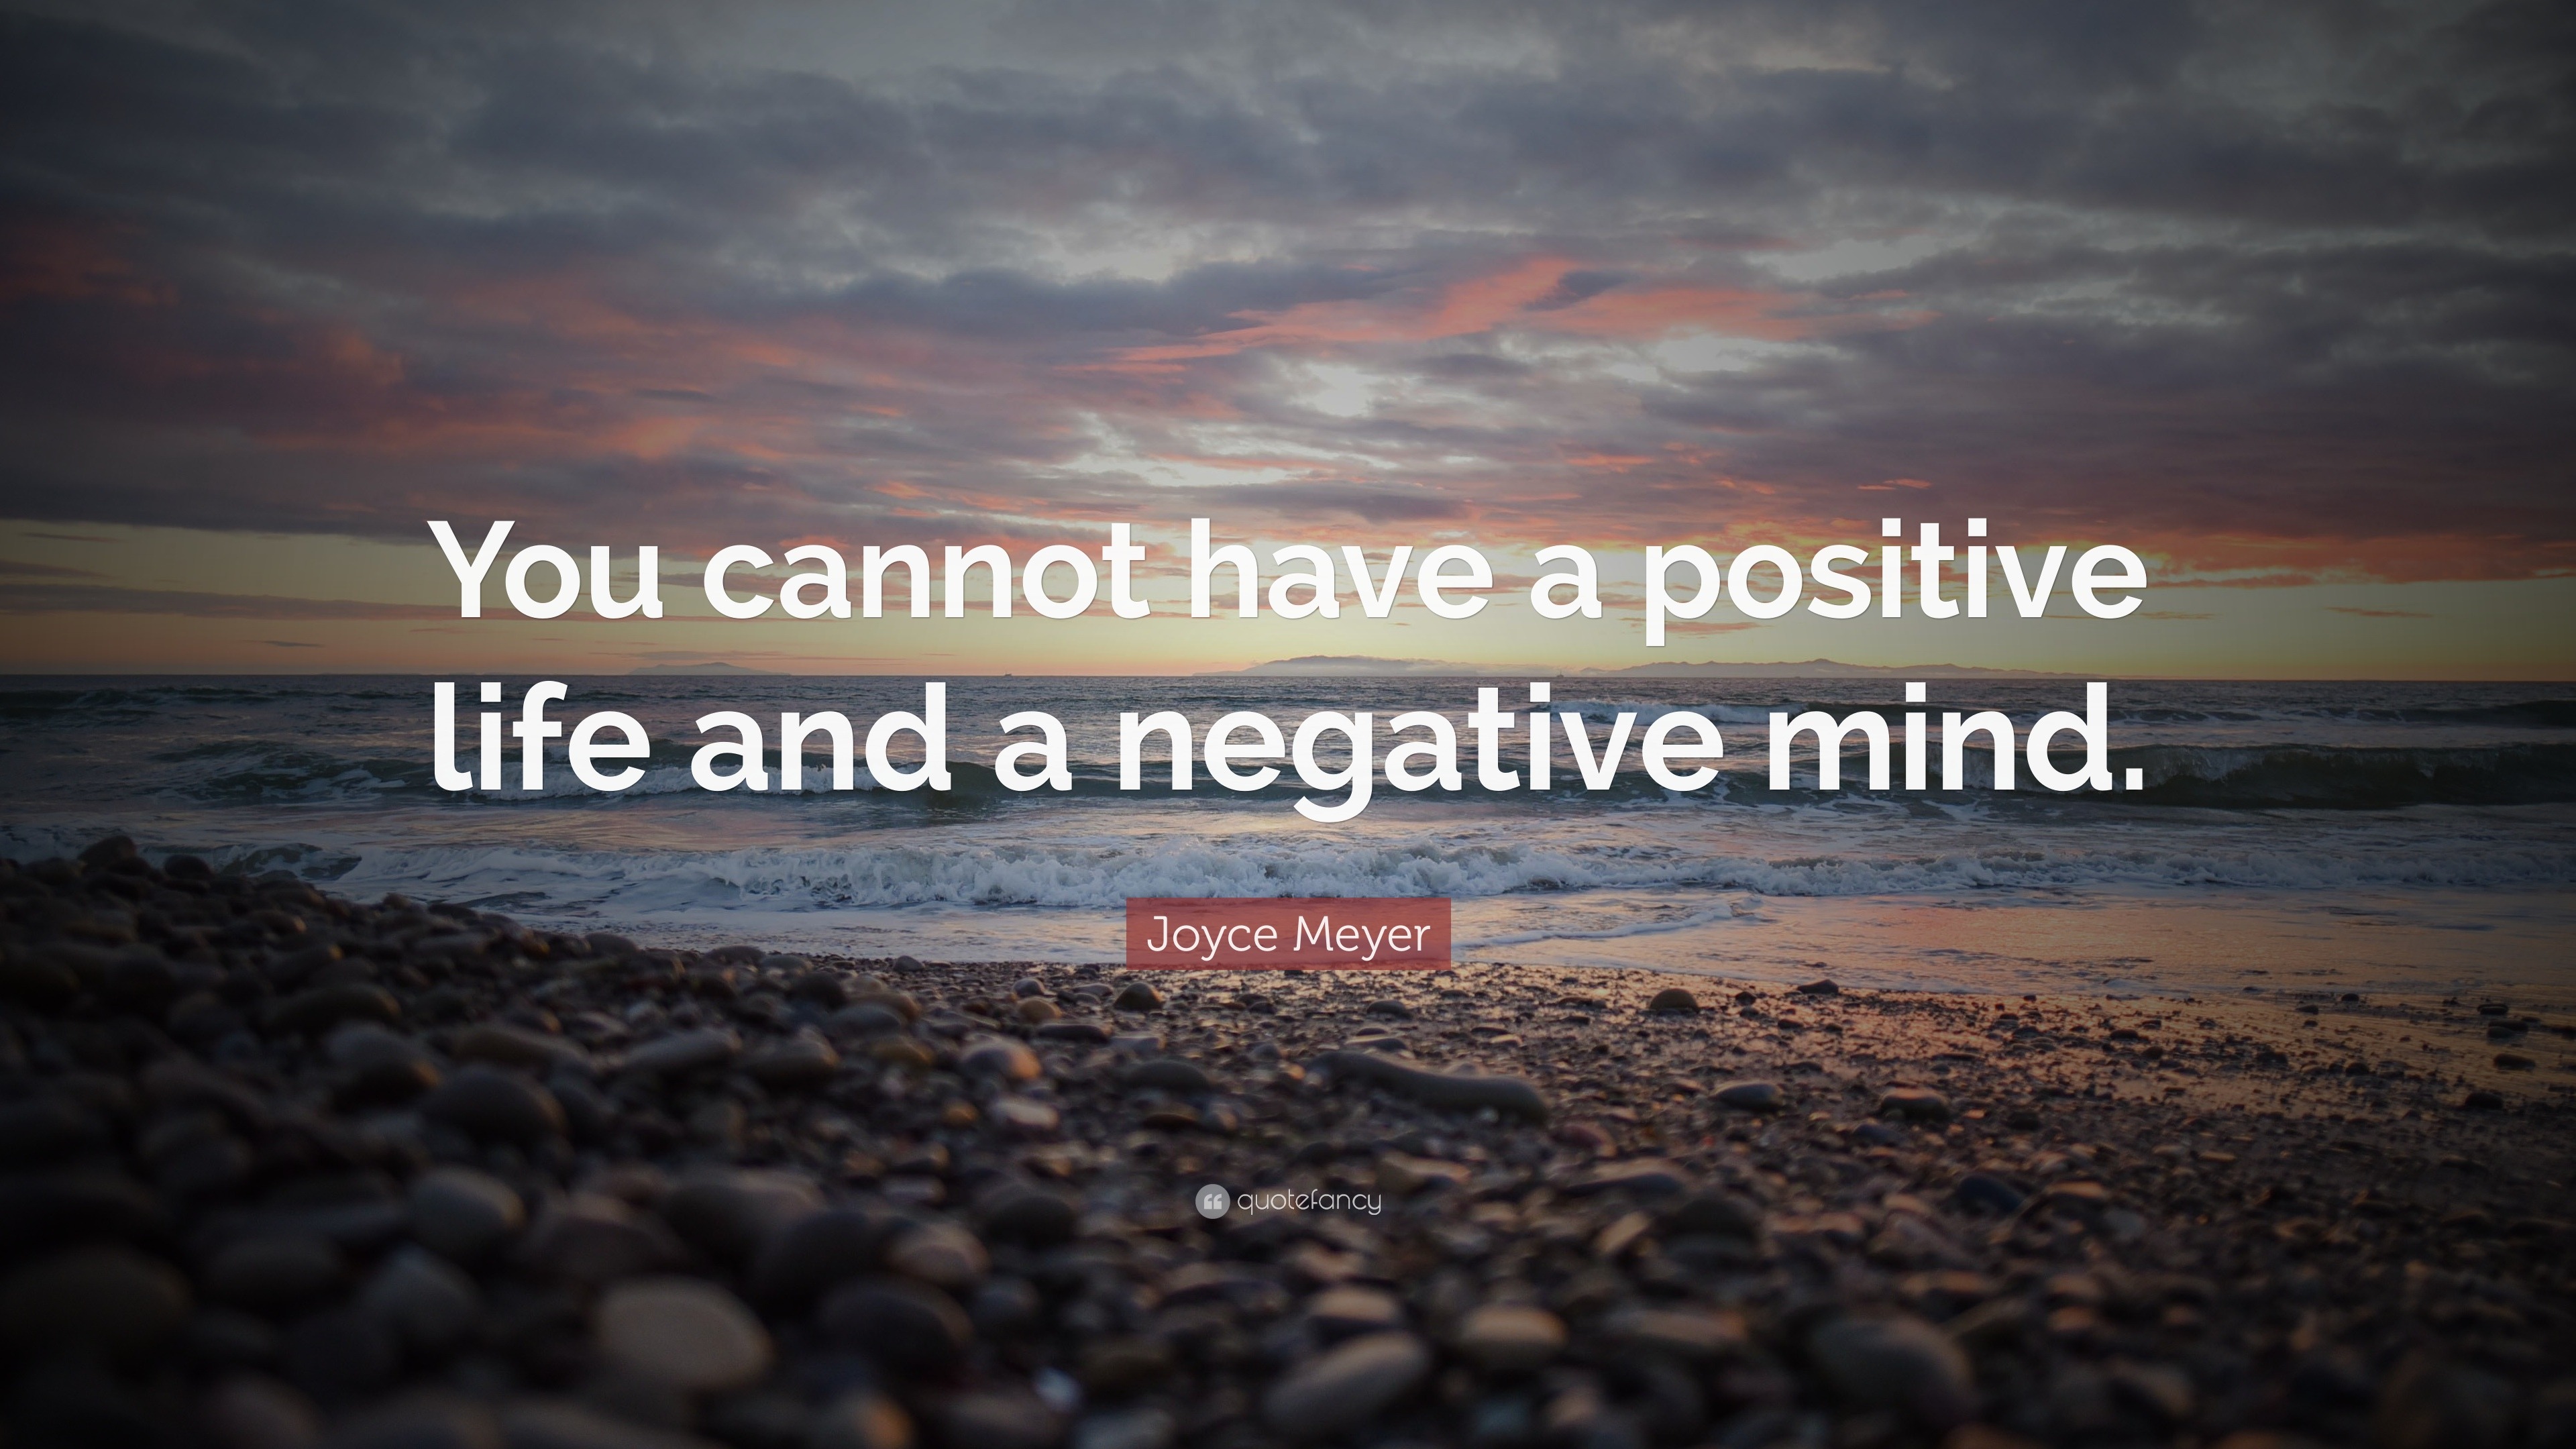 Joyce Meyer Quote “You cannot have a positive life and a negative mind